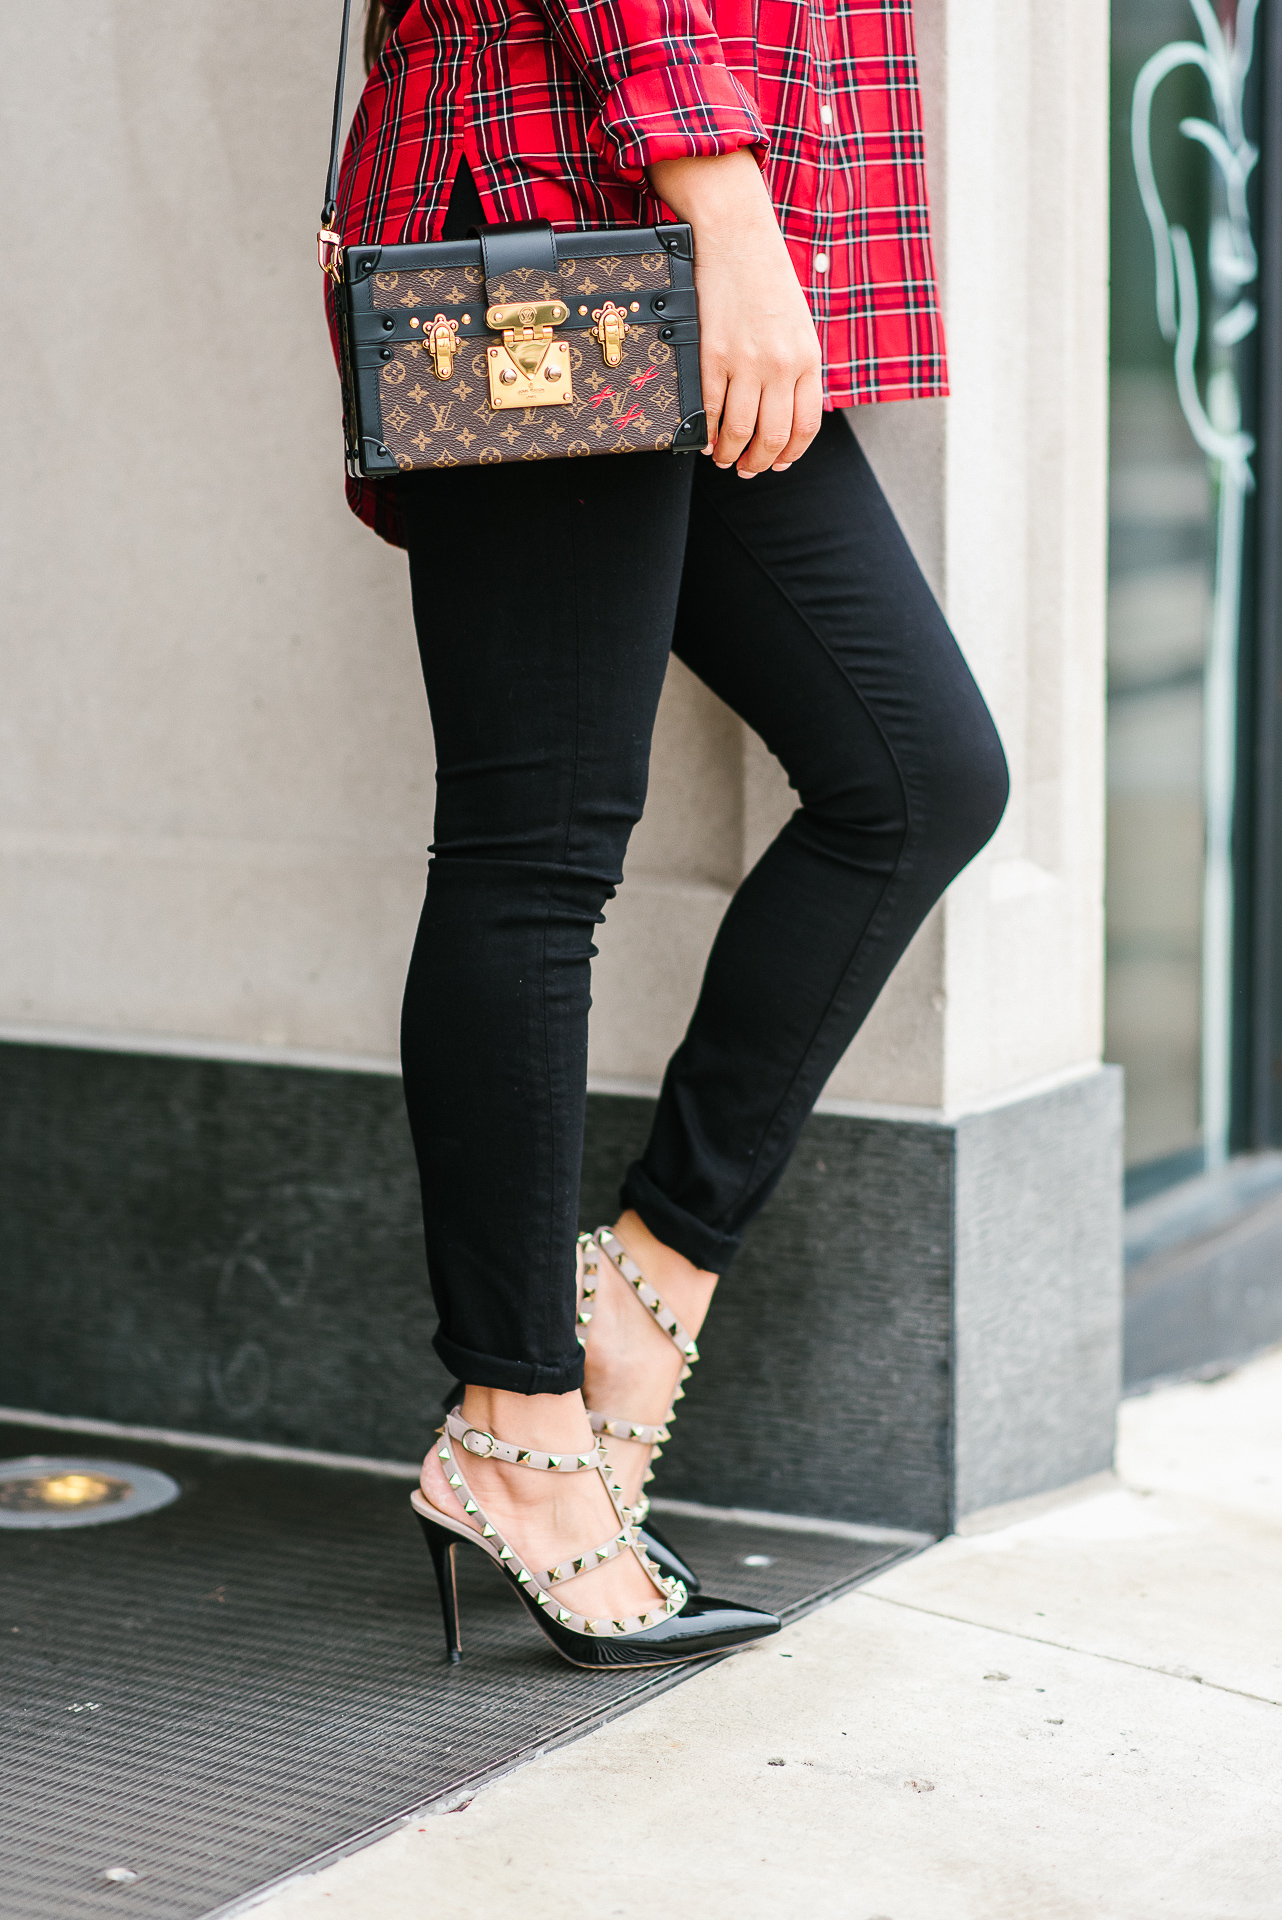 Red Plaid + Rockstuds | LuxMommy | Houston Fashion, Beauty and ...